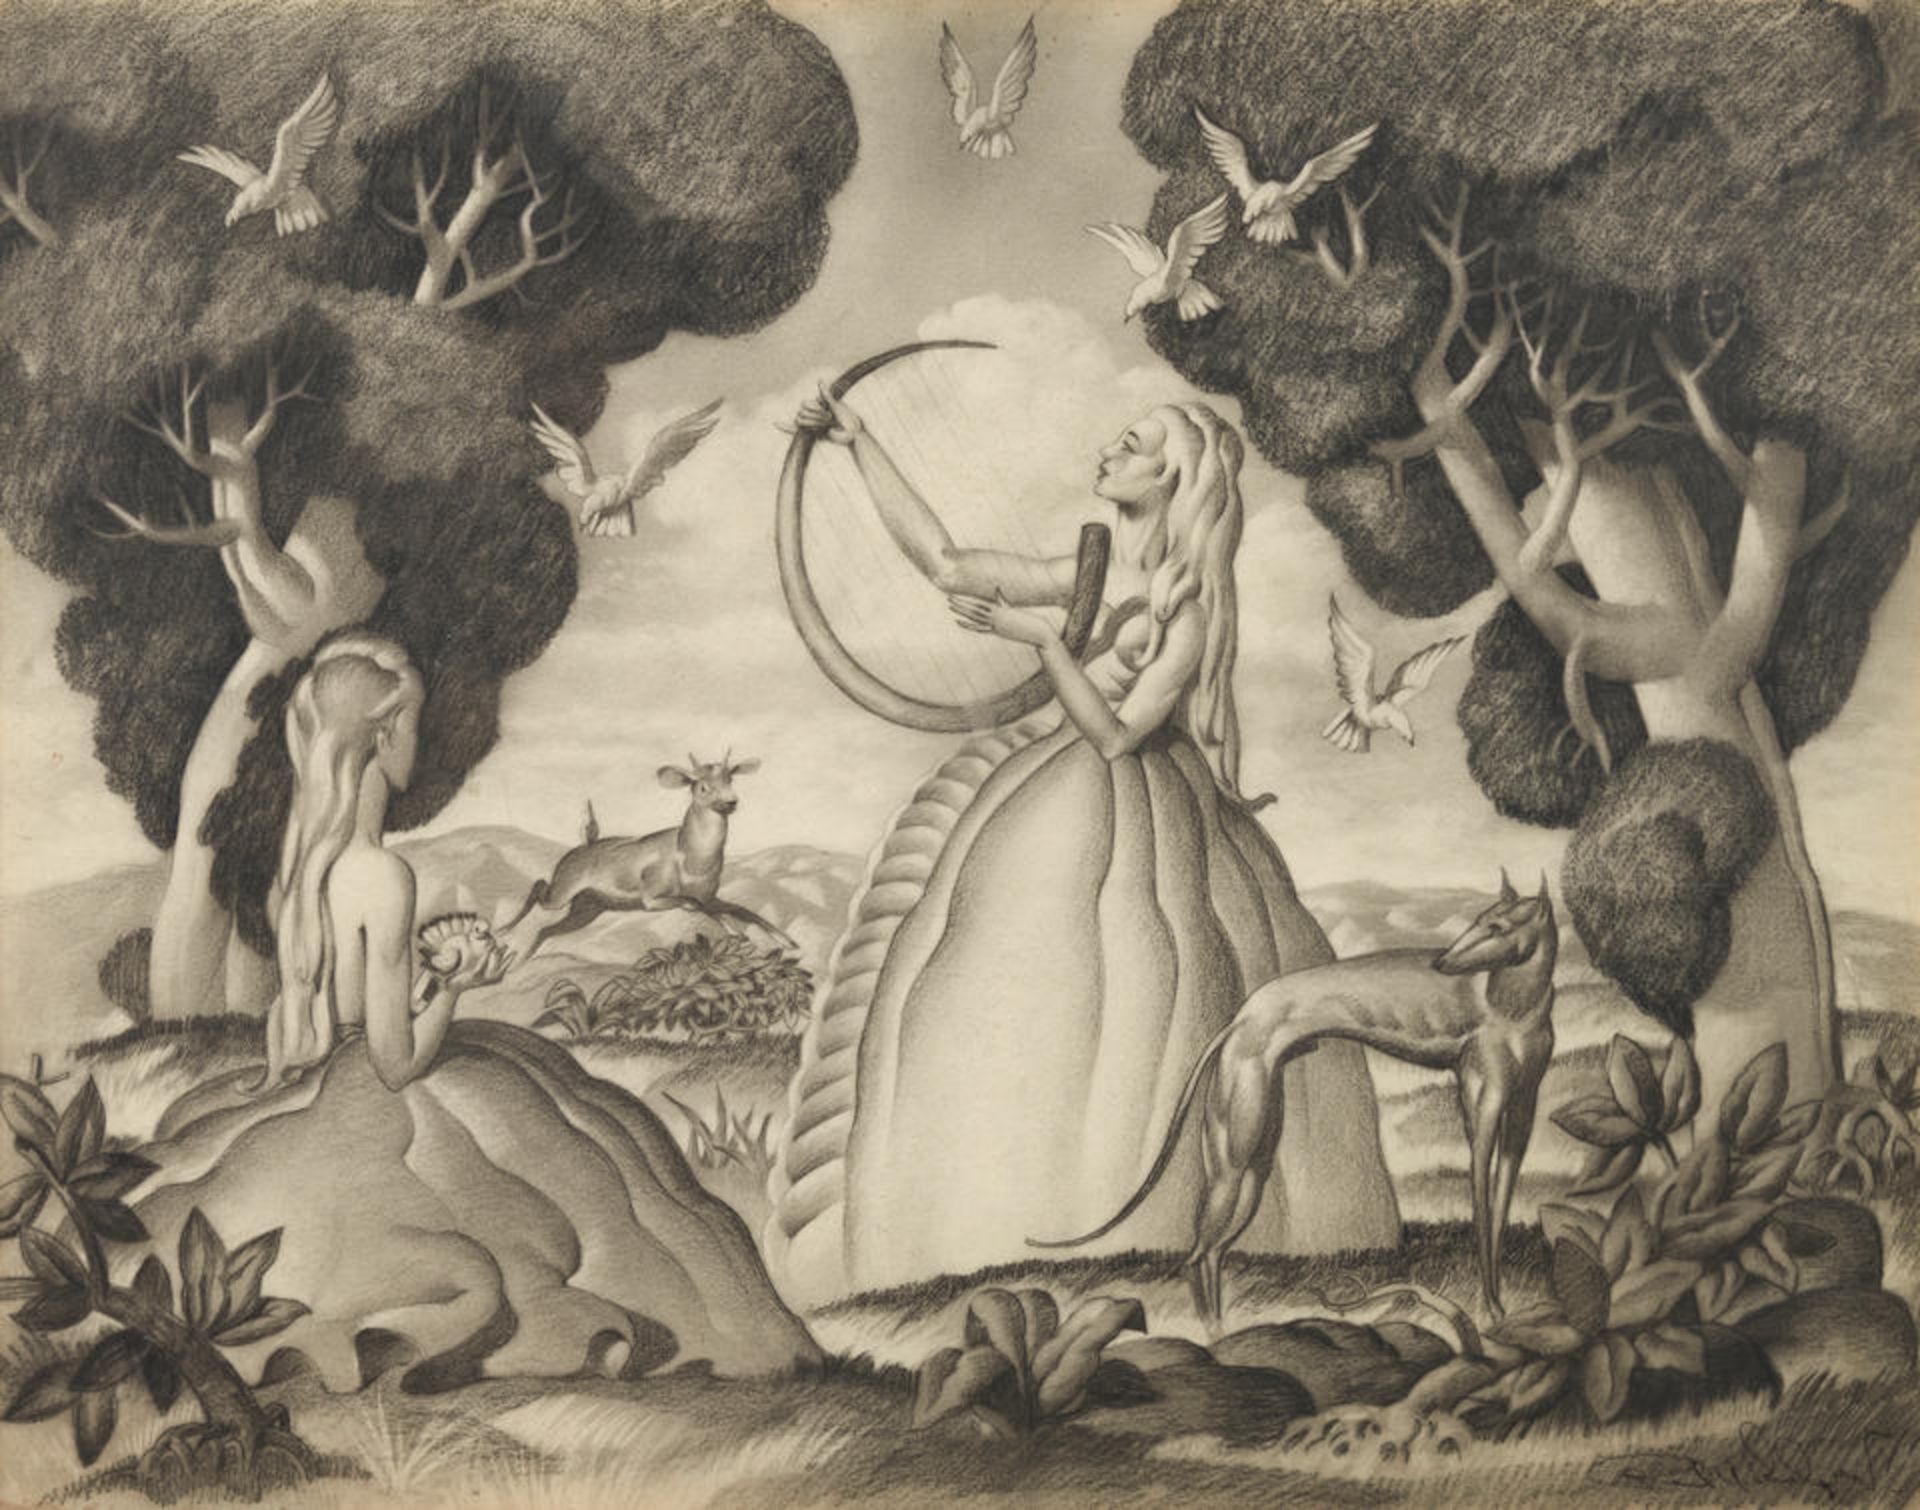 CHARCOAL DRAWING DEPICTING A WOMAN PLAYING A LYRE IN A LANDSCAPE, c. 1935, charcoal and graphite...